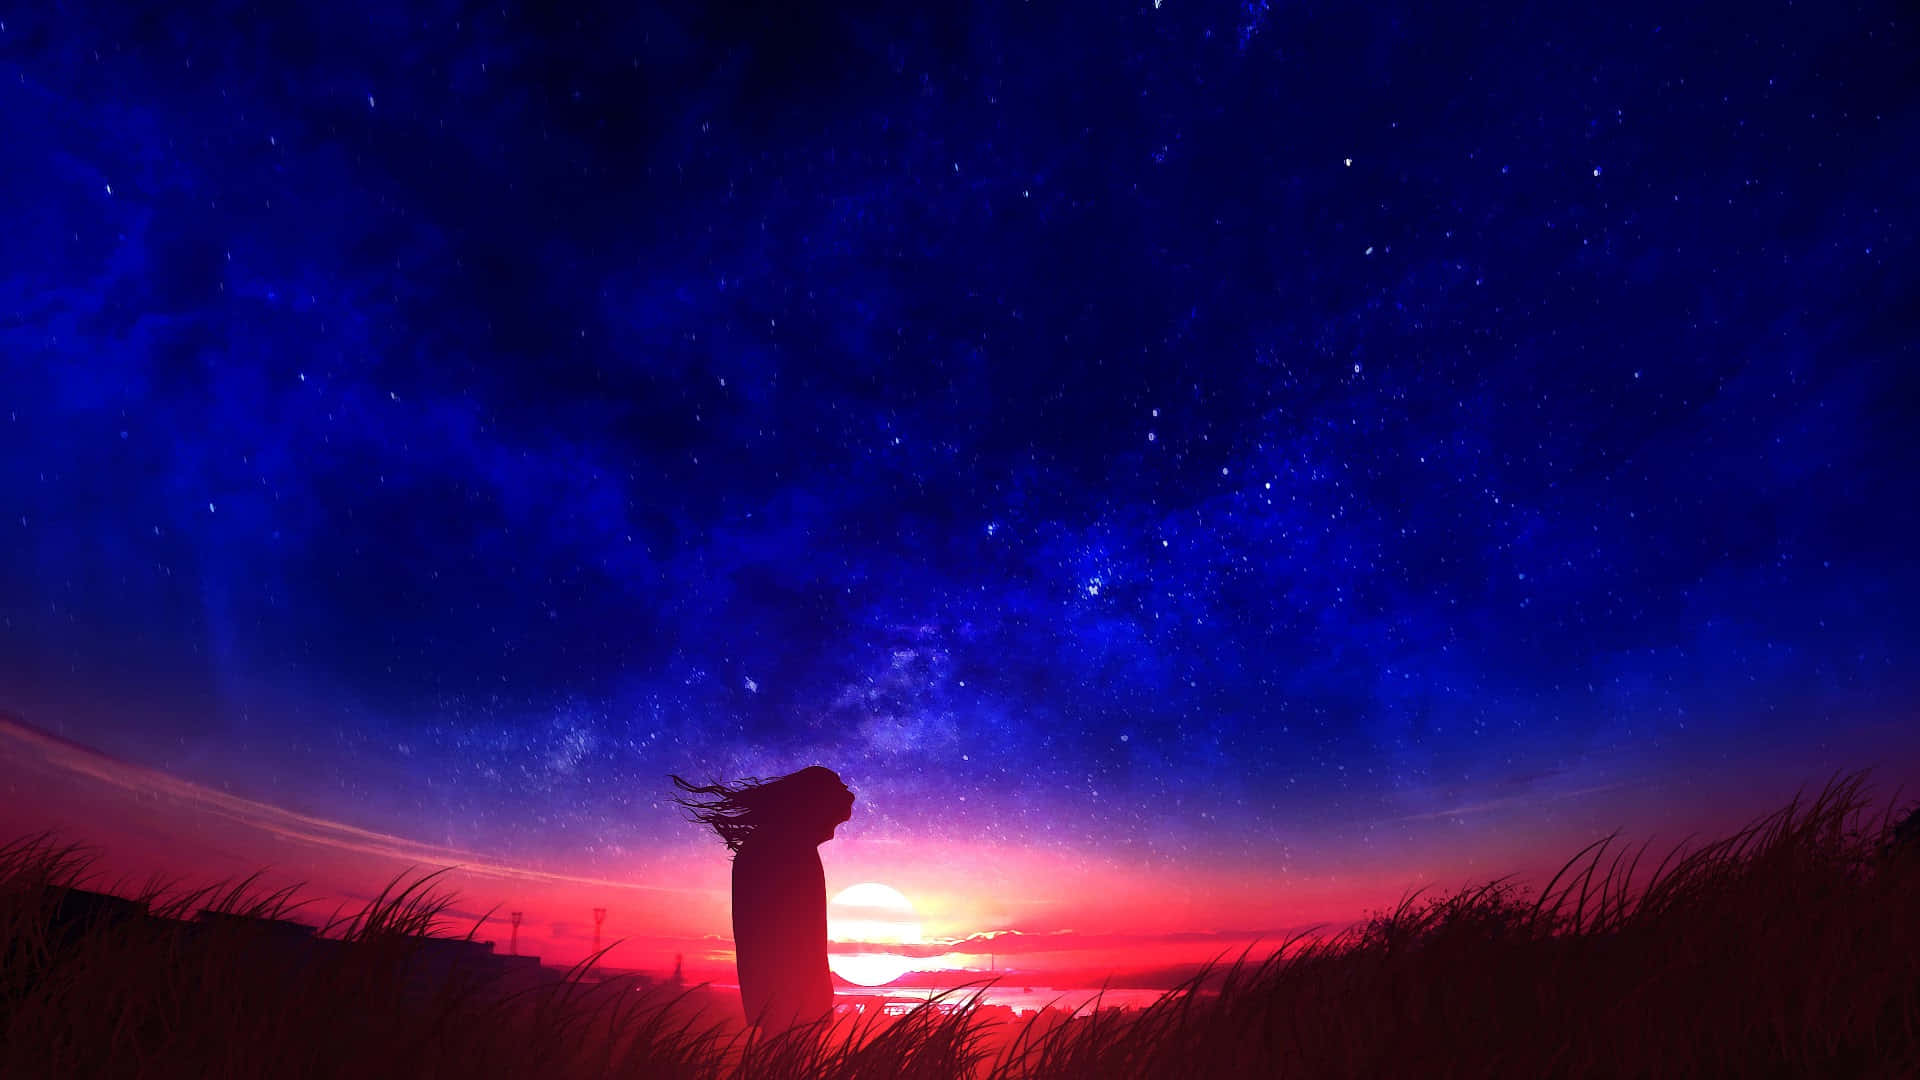 Serene Anime Sunset - A Picturesque Moment